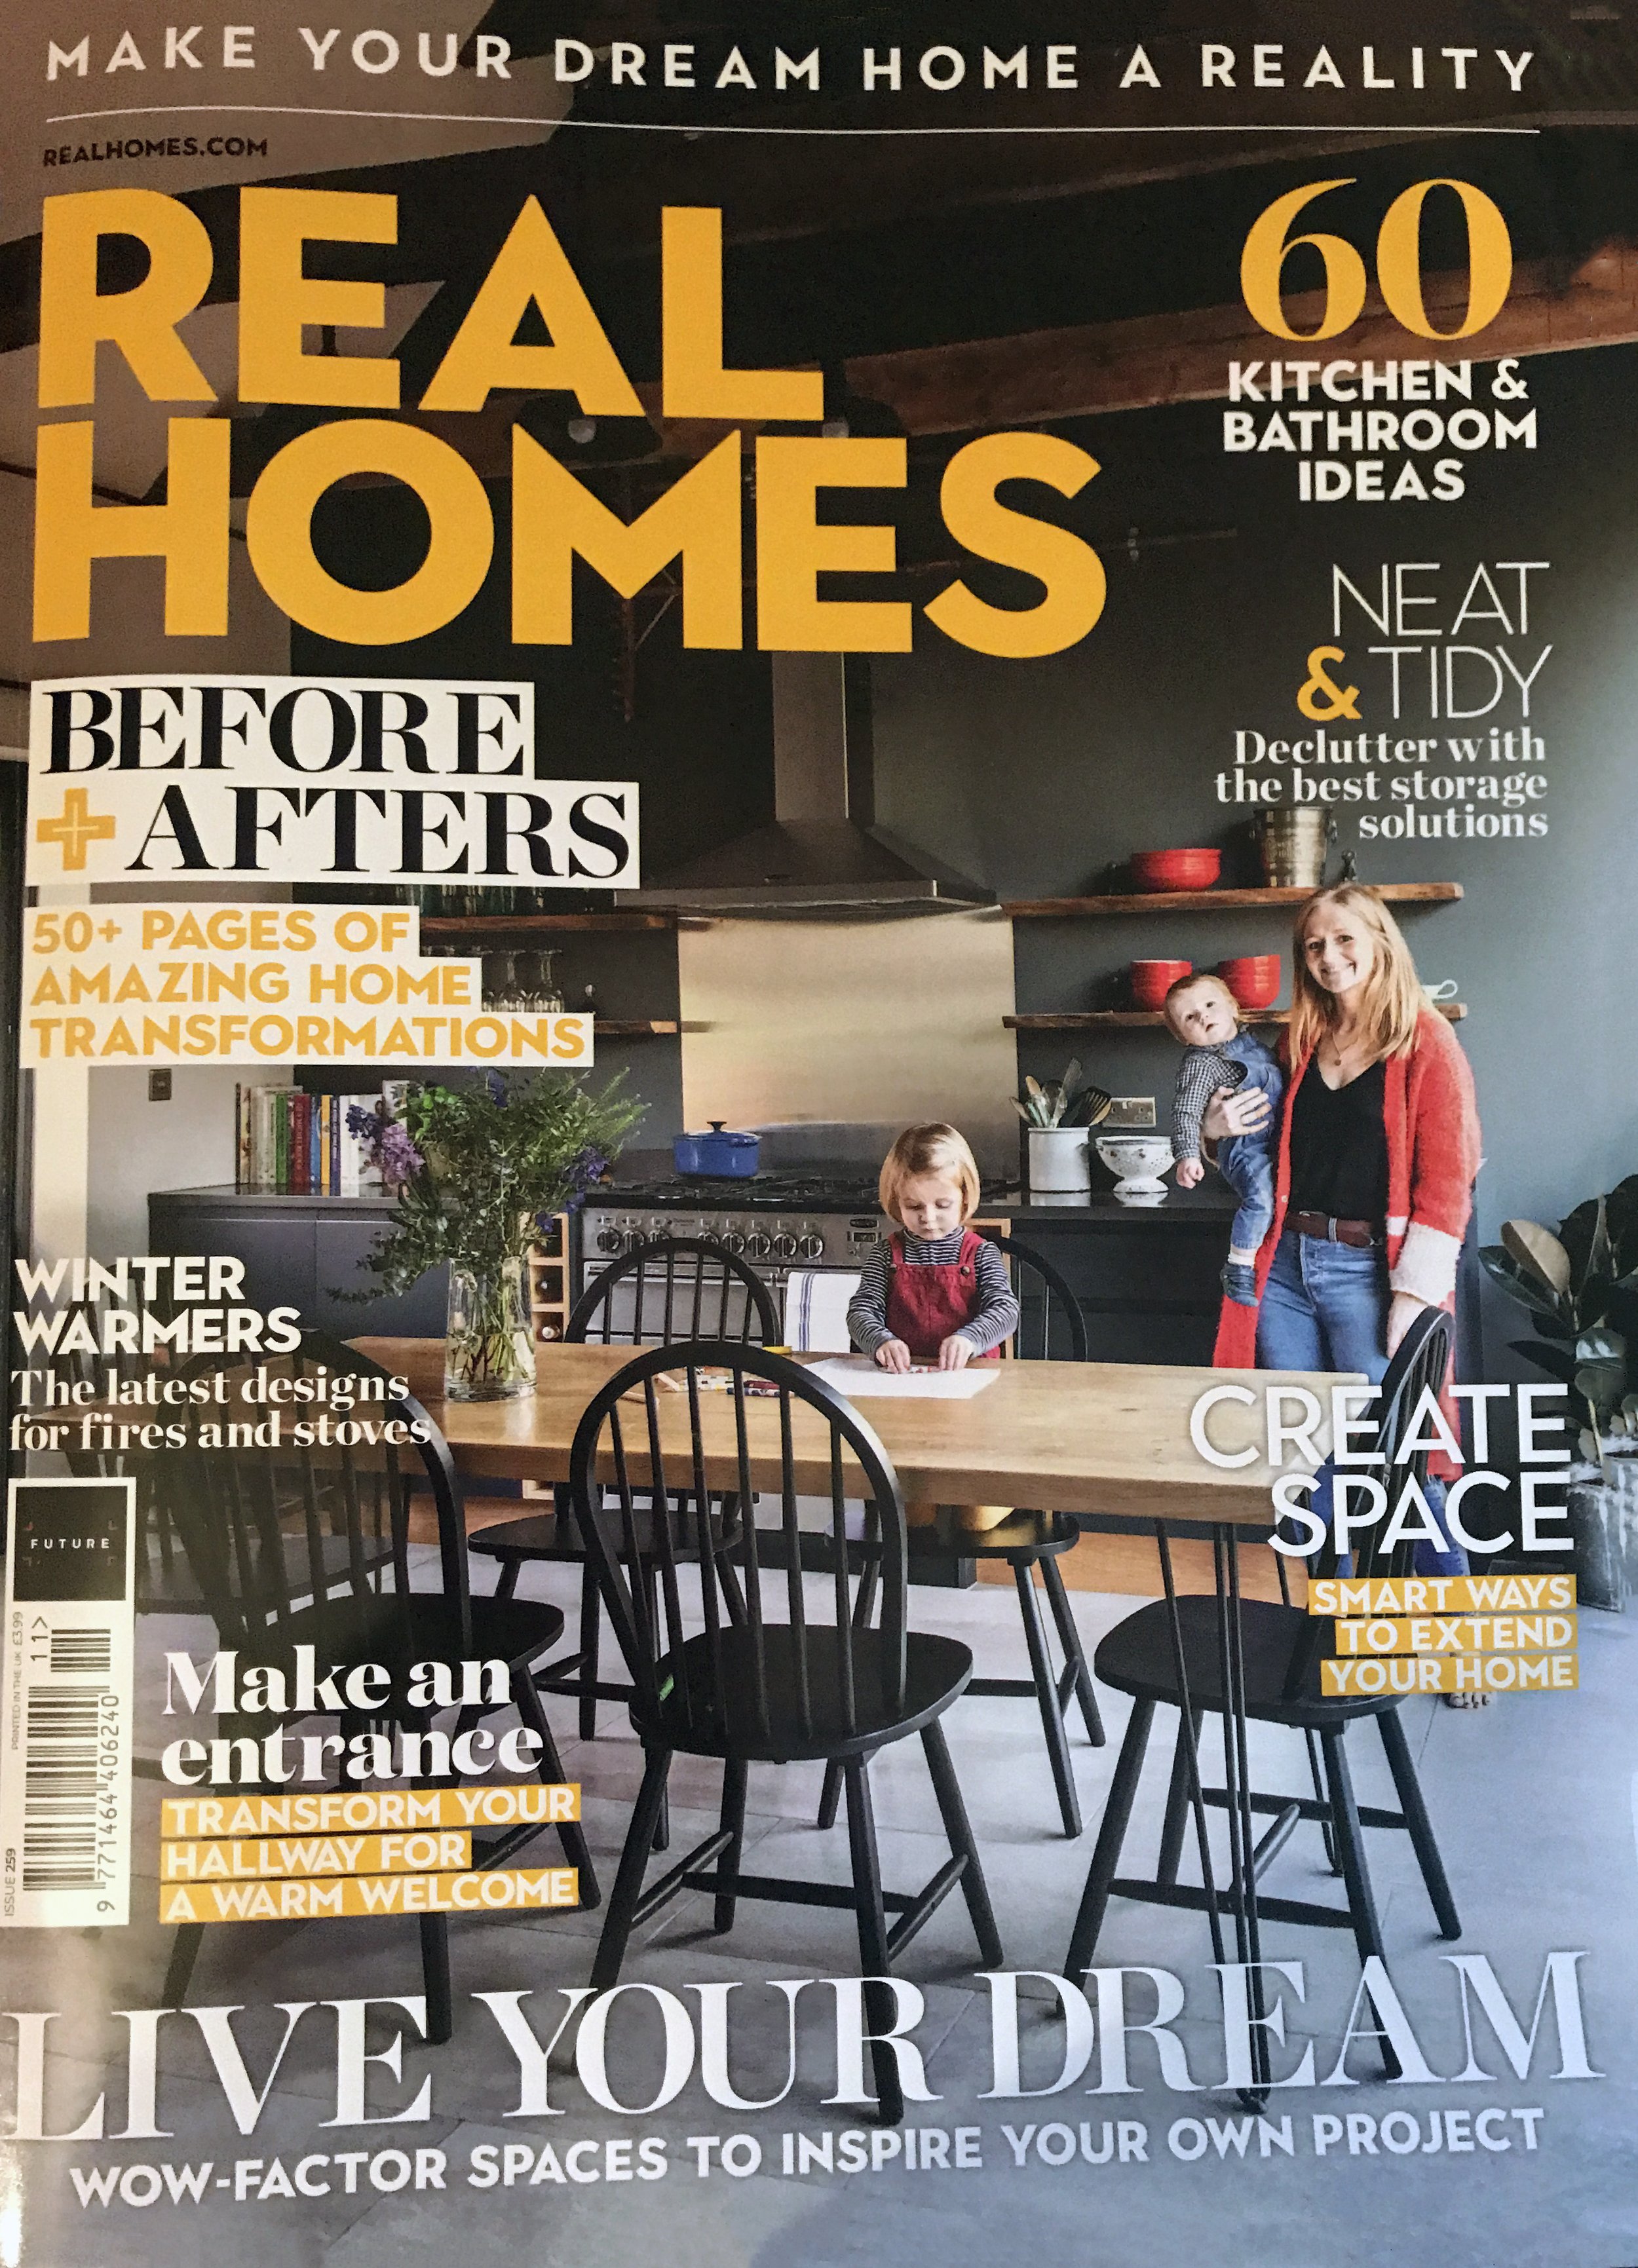 Real Homes cover story.jpg